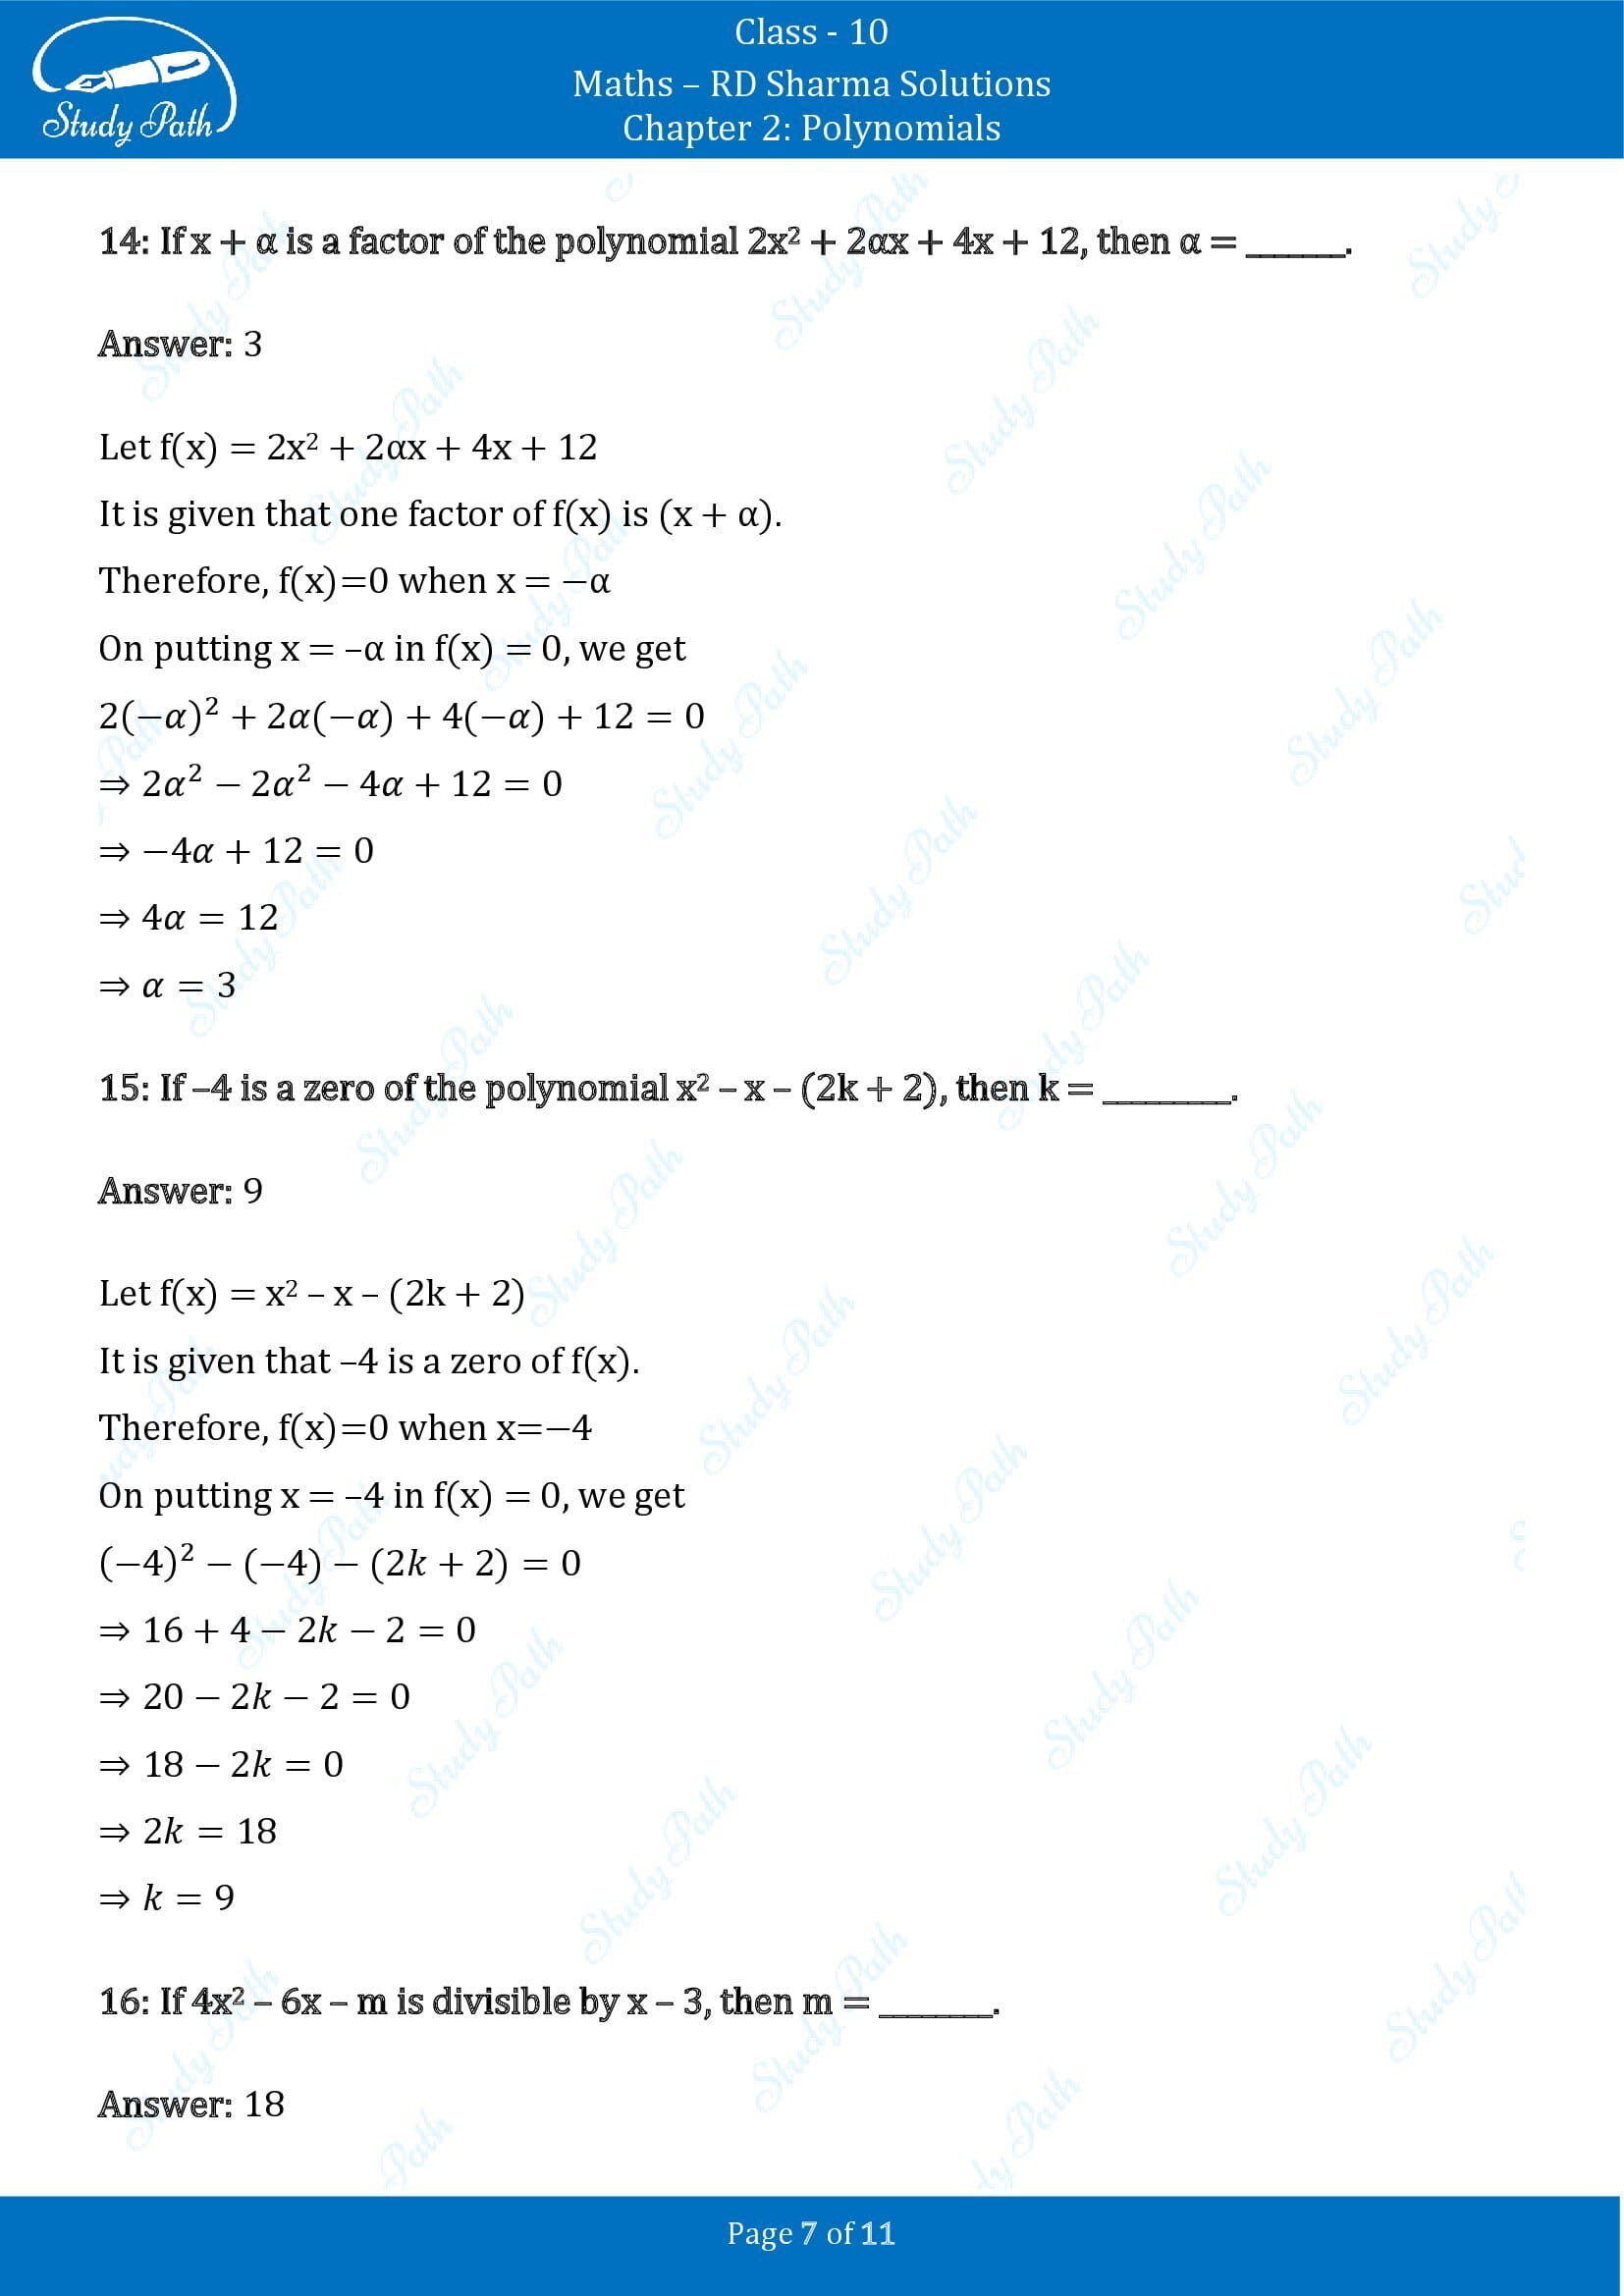 RD Sharma Solutions Class 10 Chapter 2 Polynomials Fill in the Blank Type Questions FBQs 00007